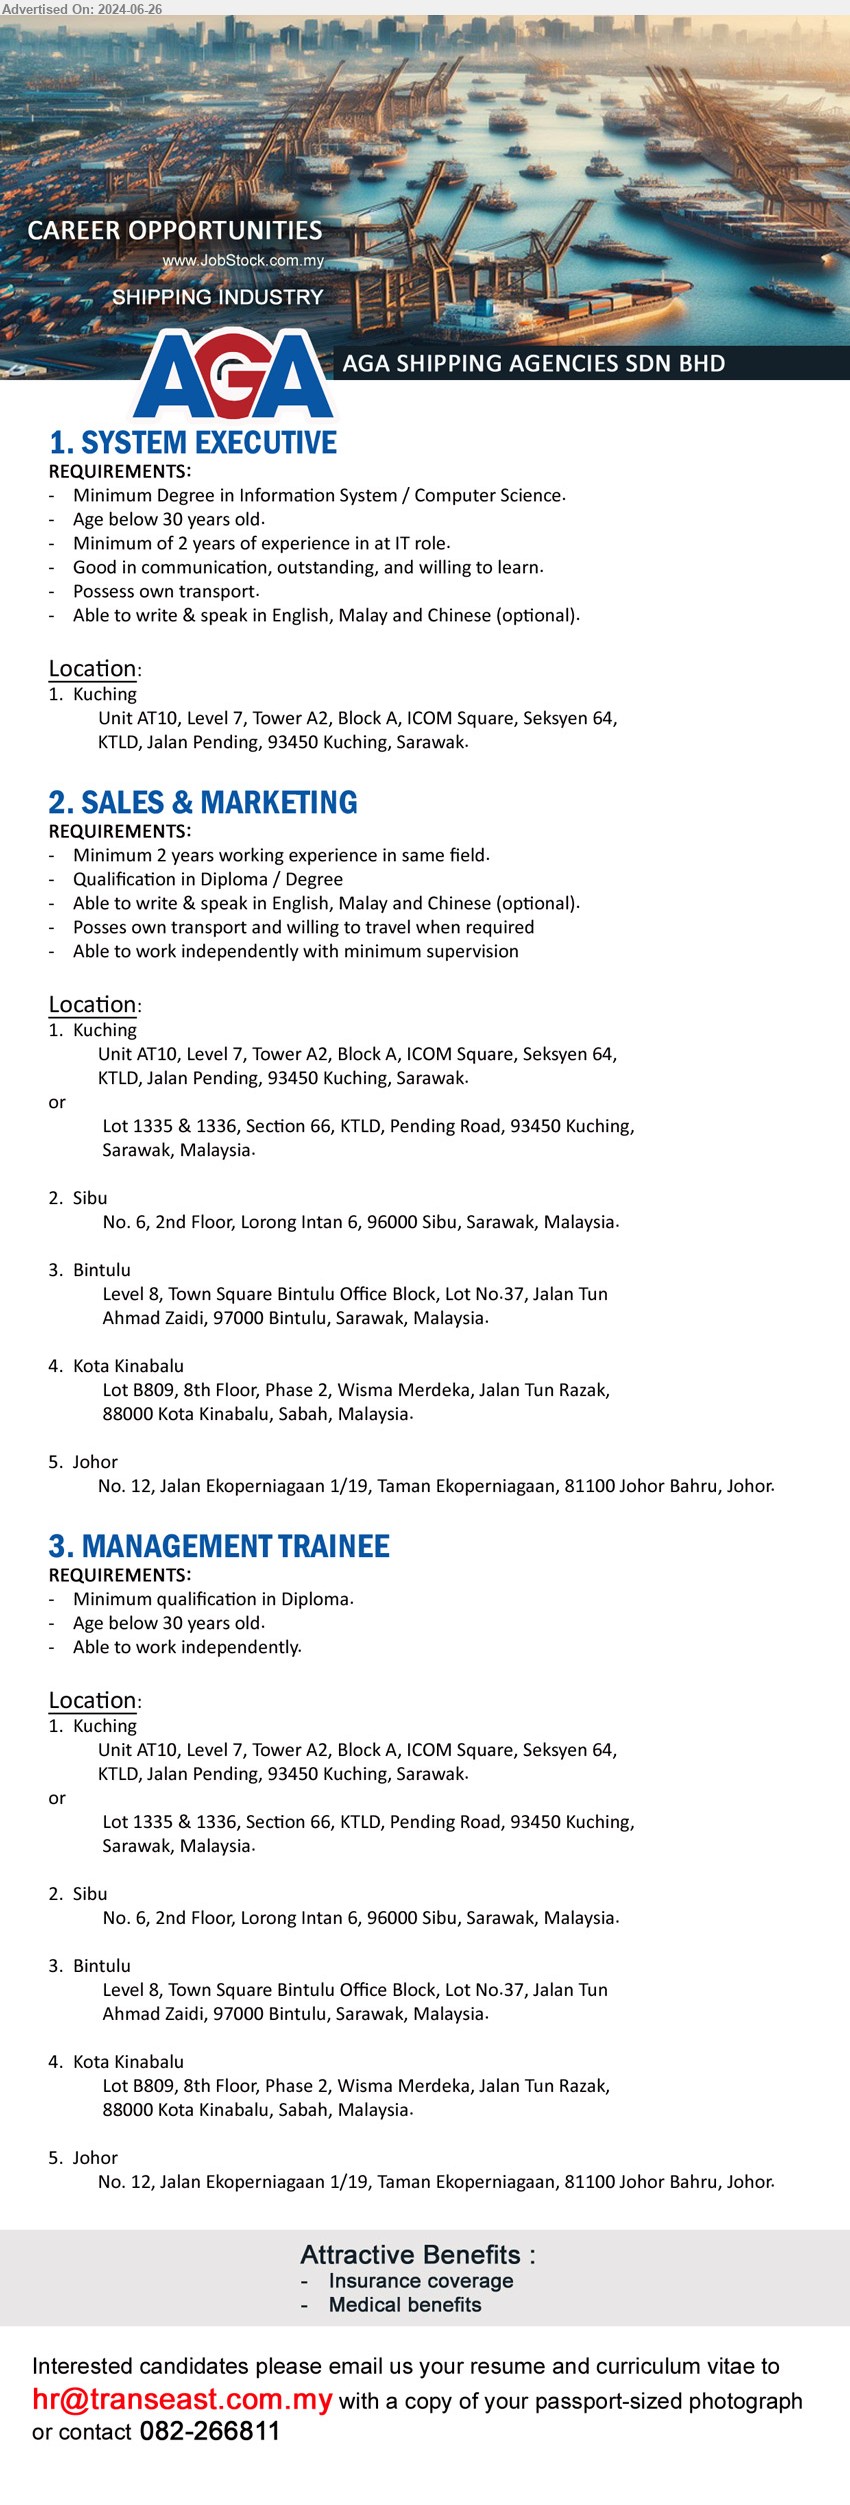 AGA SHIPPING AGENCIES SDN BHD - 1. SYSTEM EXECUTIVE (Kuching), Degree in Information System / Computer Science, 2 years of experience in at IT role,...
2. SALES & MARKETING (Kuching, Sibu, Bintulu, Kota Kinabalu, Johor), Diploma / Degree, 2 yrs. exp., own transport and willing to travel,...
3. MANAGEMENT TRAINEE (Kuching, Sibu, Bintulu, Kota Kinabalu, Johor), Diploma, Age below 30 years old, able to work independently, ...
Call 082-266811  / Email resume to ...